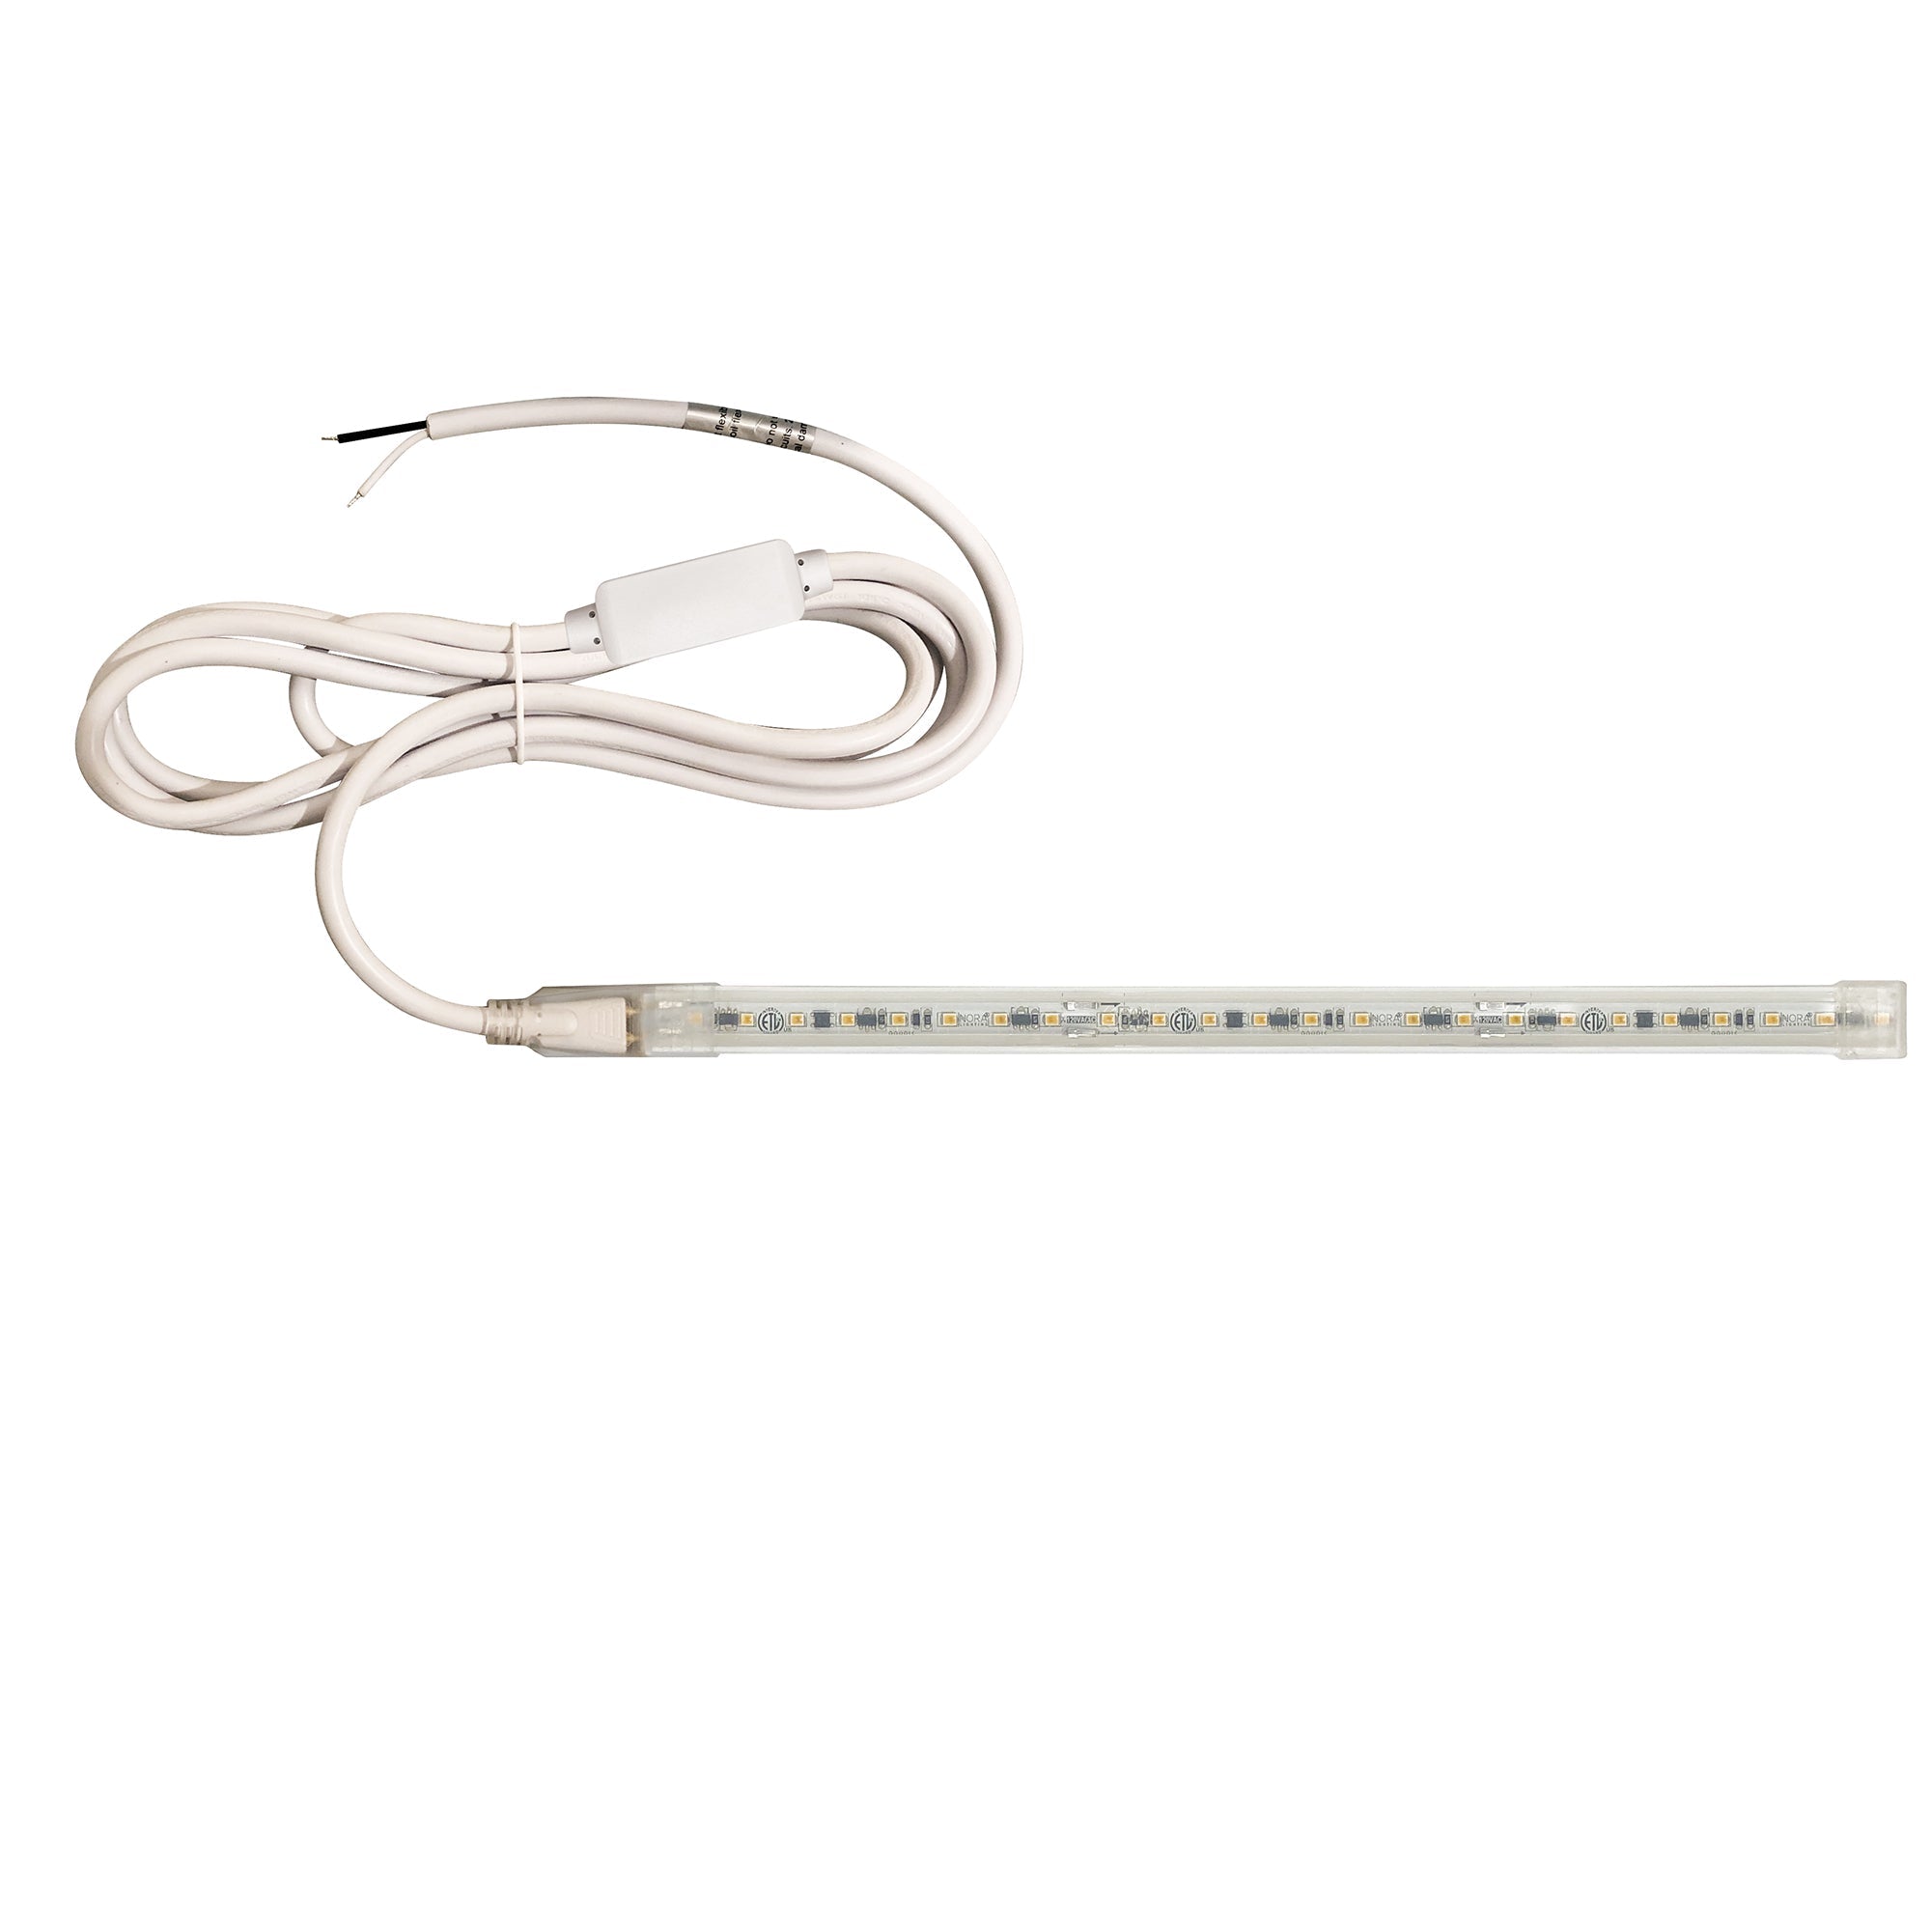 Nora Lighting NUTP13-W43-4-12-930/HWSP - Accent / Undercabinet - Custom Cut 43-ft, 4-in 120V Continuous LED Tape Light, 330lm / 3.6W per foot, 3000K, w/ Mounting Clips and 8' Hardwired Power Cord w/ Surge Protector